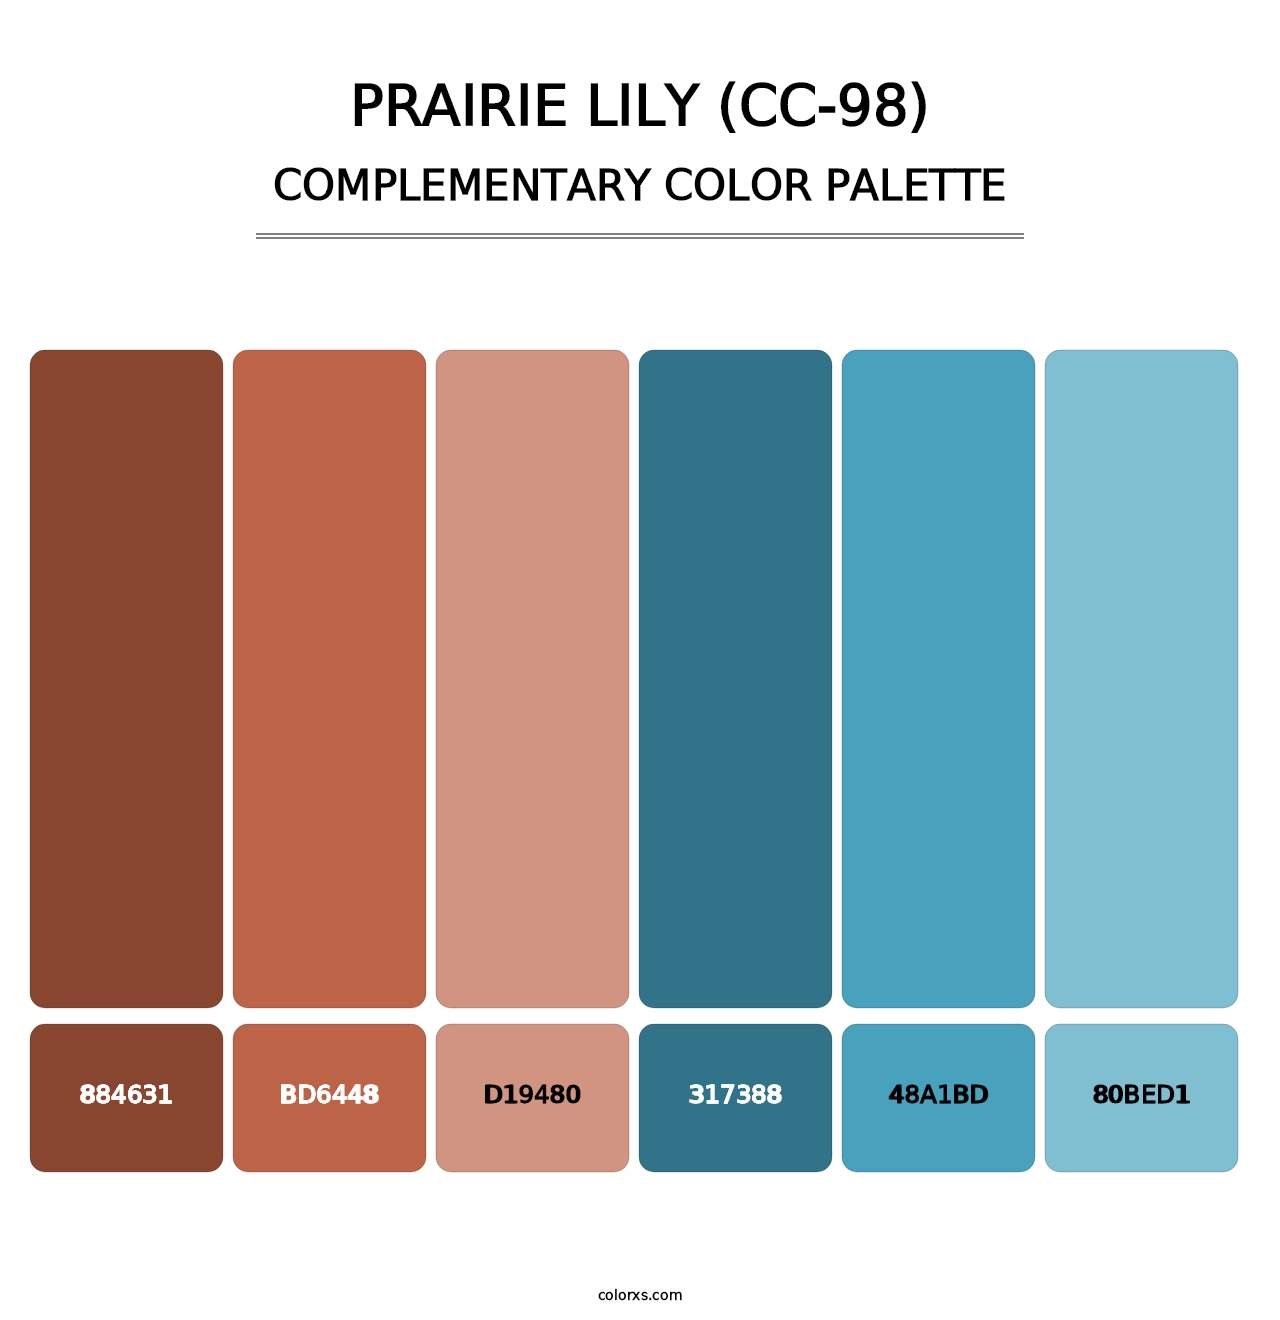 Prairie Lily (CC-98) - Complementary Color Palette